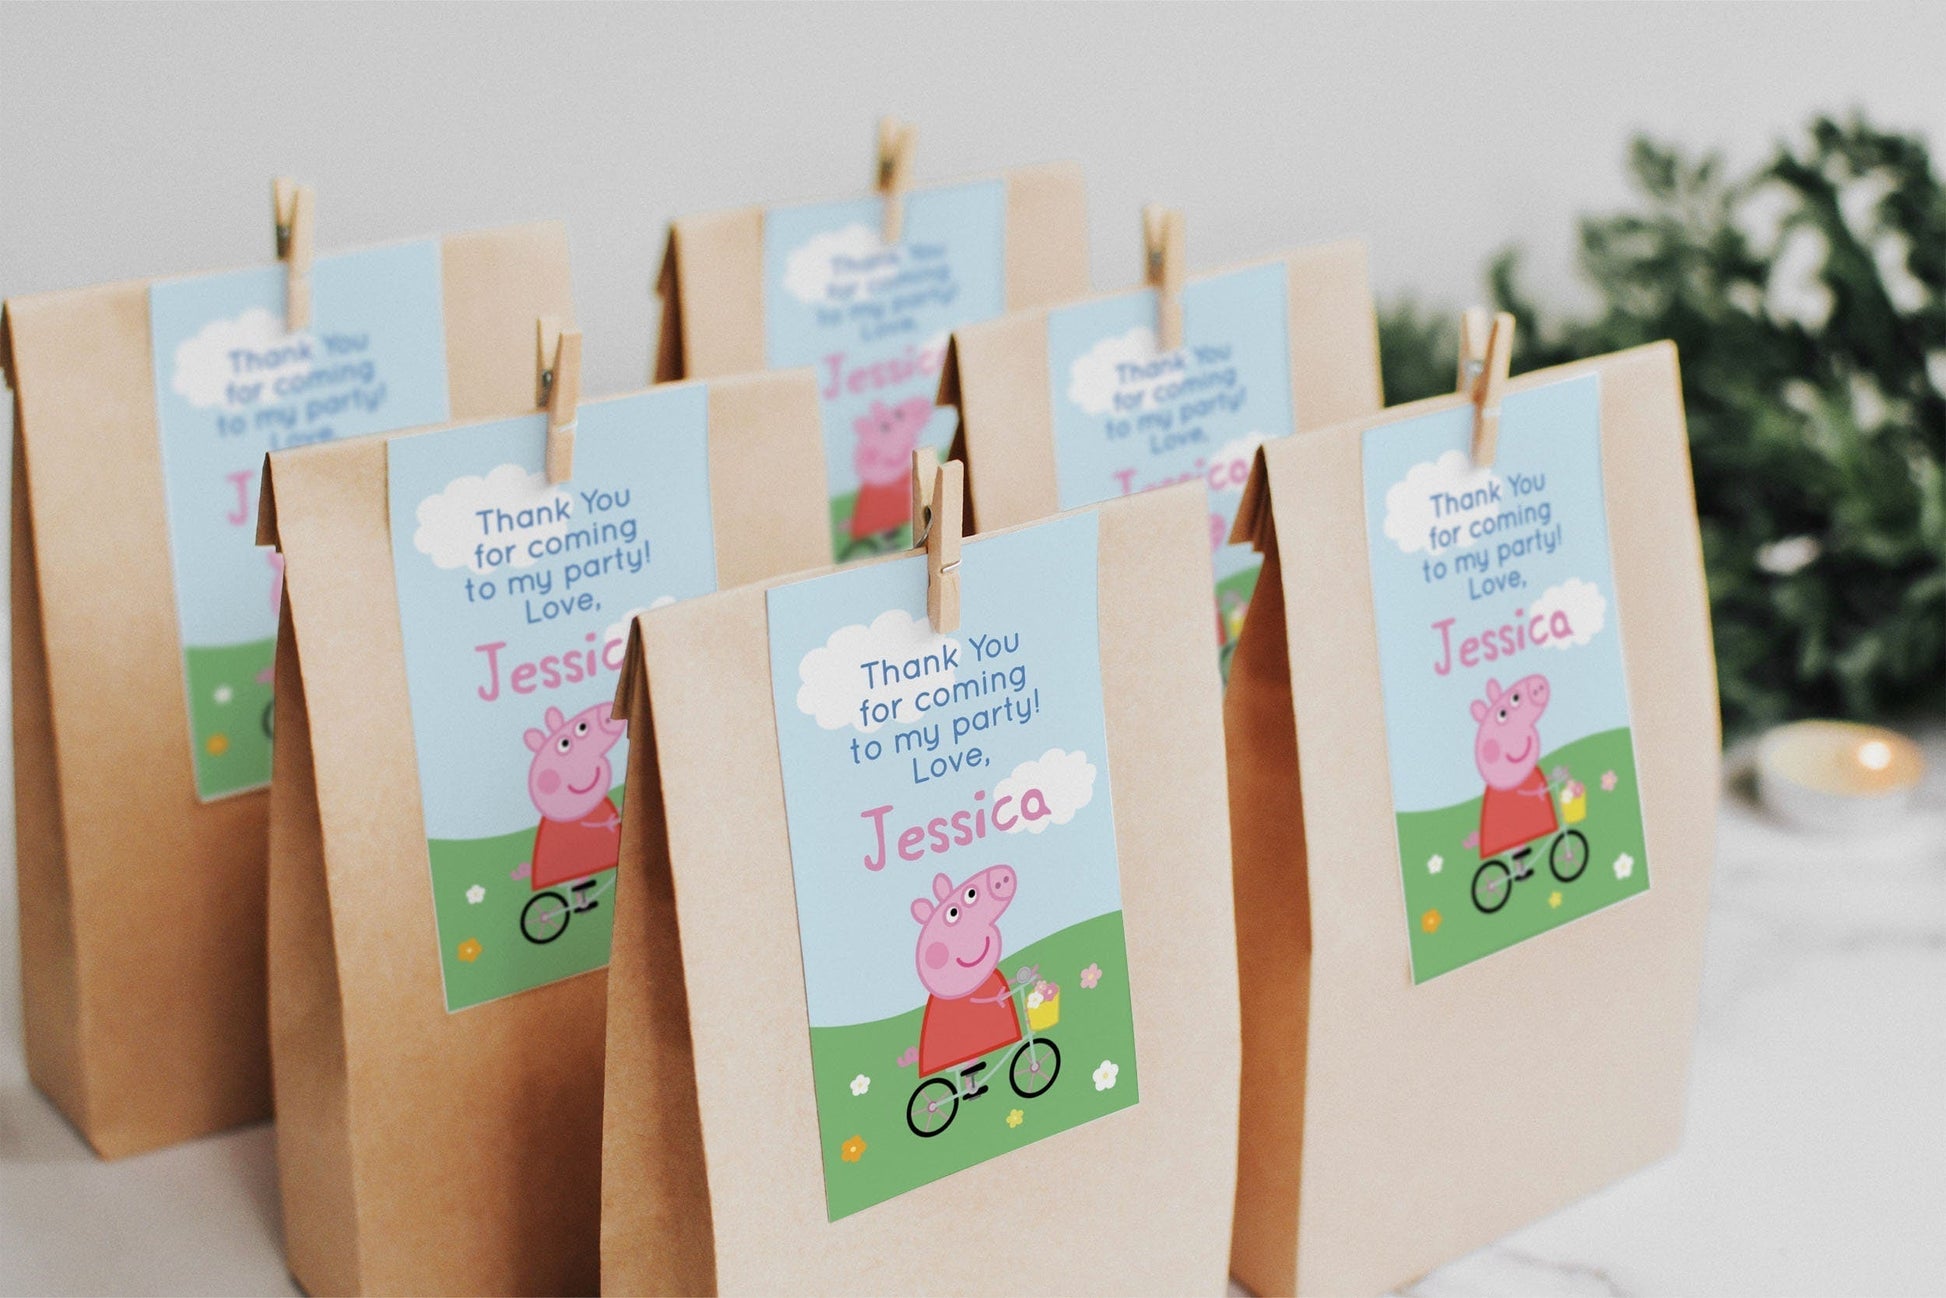 Editable Peppa Pig Birthday BUNDLE | Printable Peppa Pig Birthday Decorations  This bundle of printables is designed to bring the fun and ease of a professional party to your home, with quick and easy editing and printing.